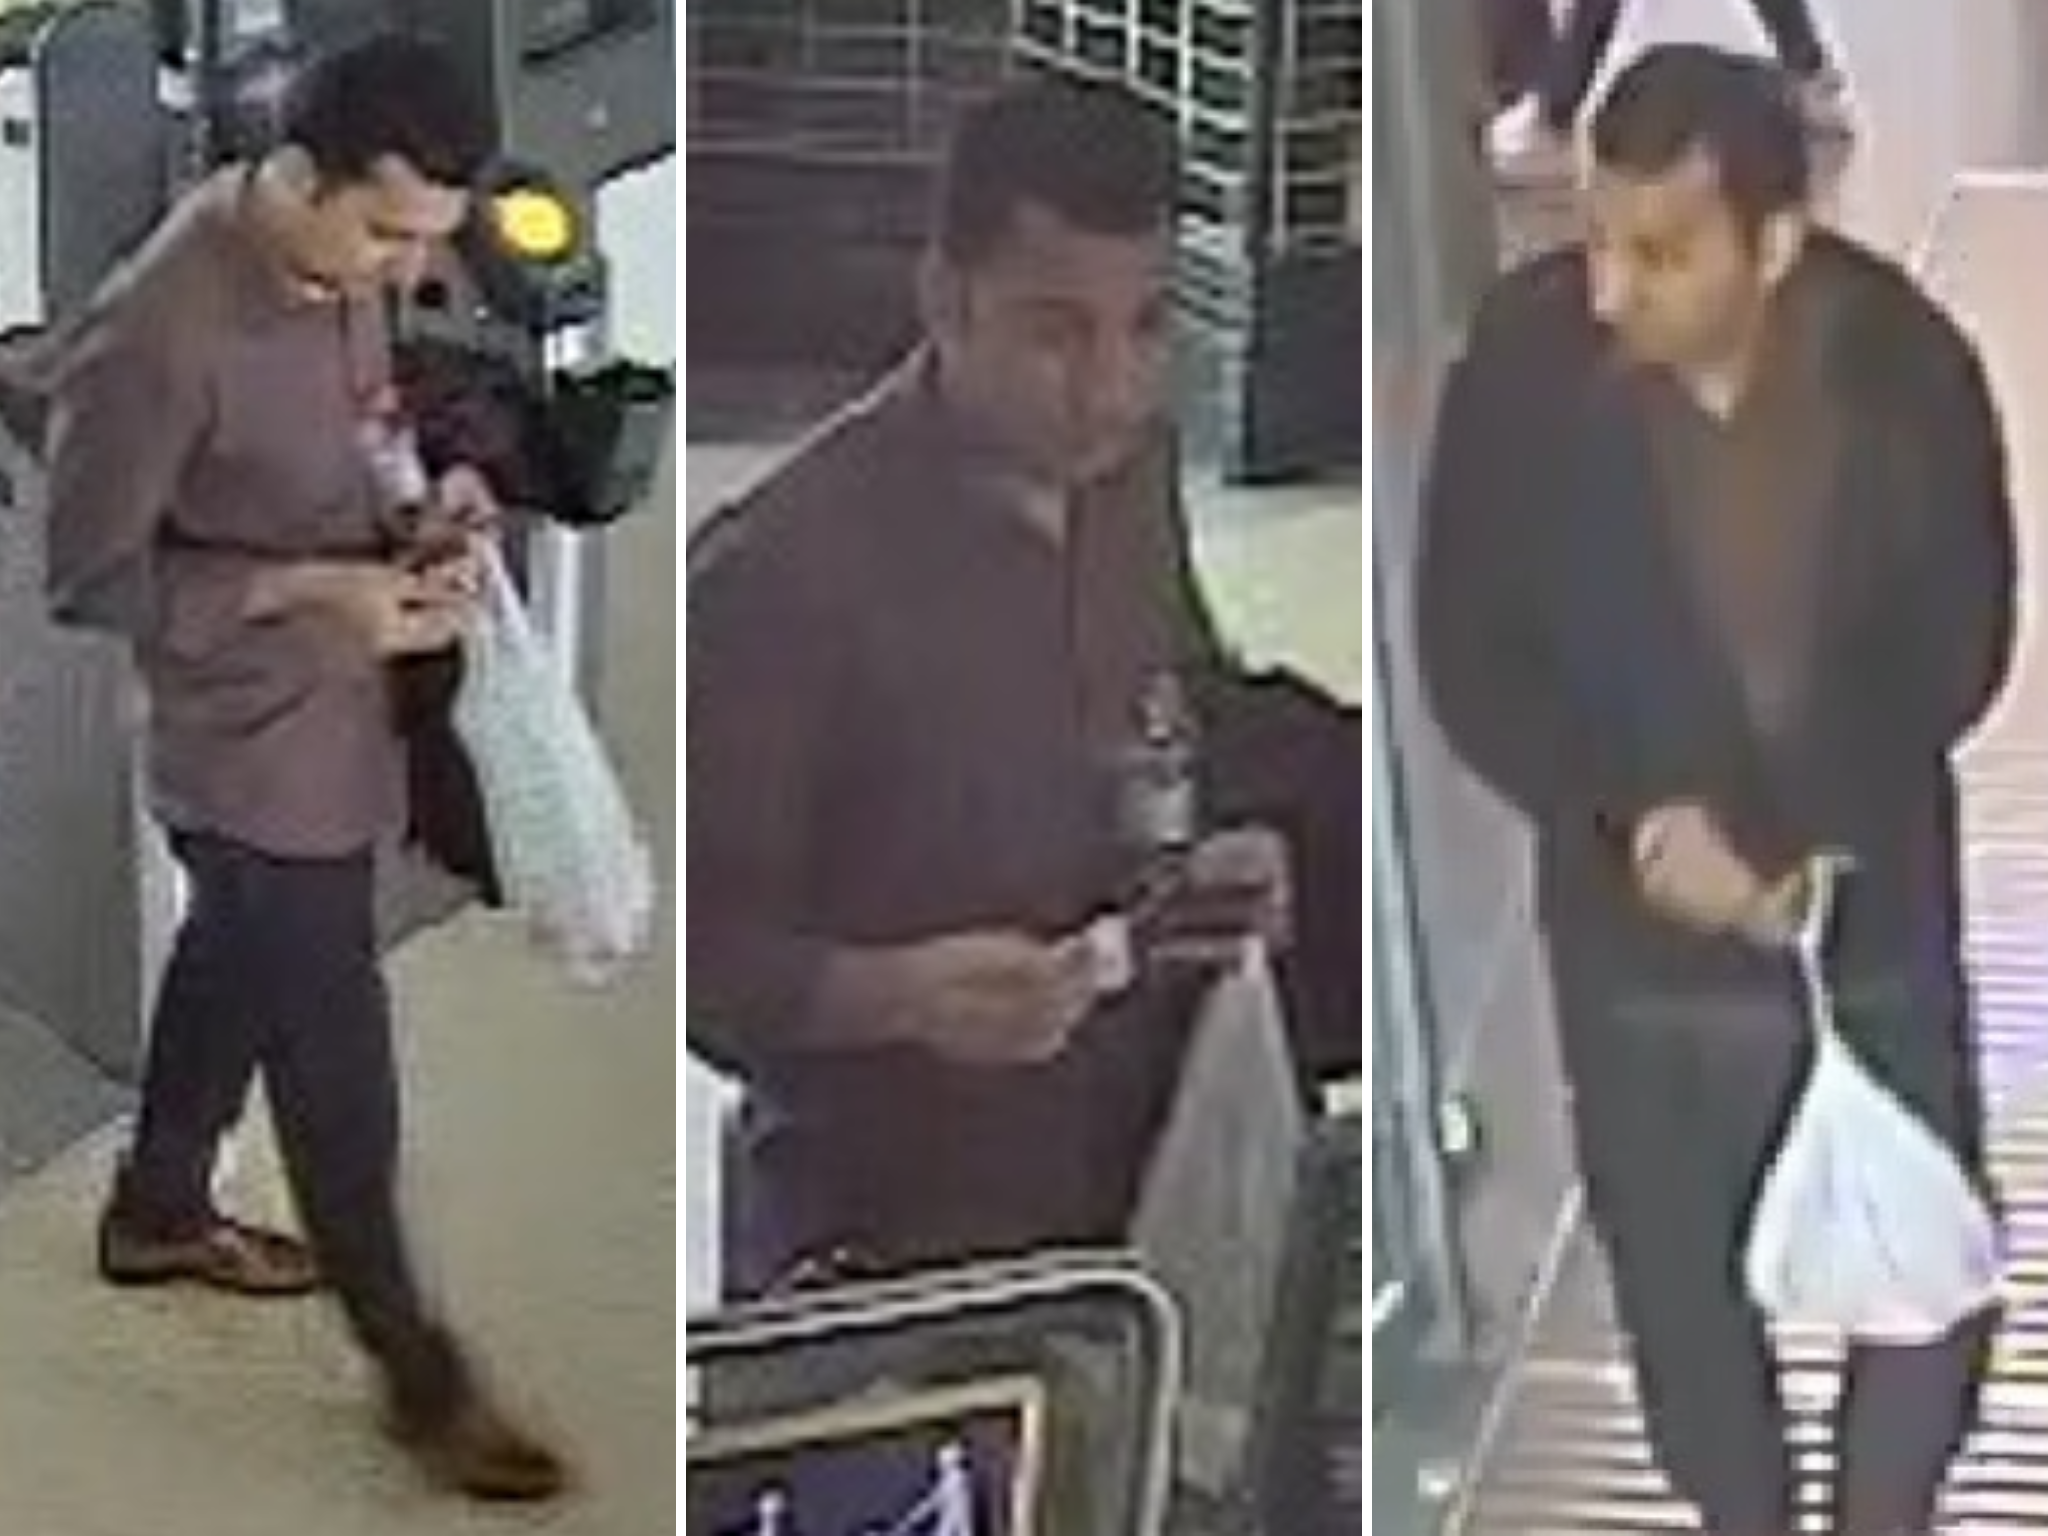 Police have released CCTV images of a man they wish to speak to after a 16-year-old girl was allegedly sexually assaulted at a railway station in North Wales